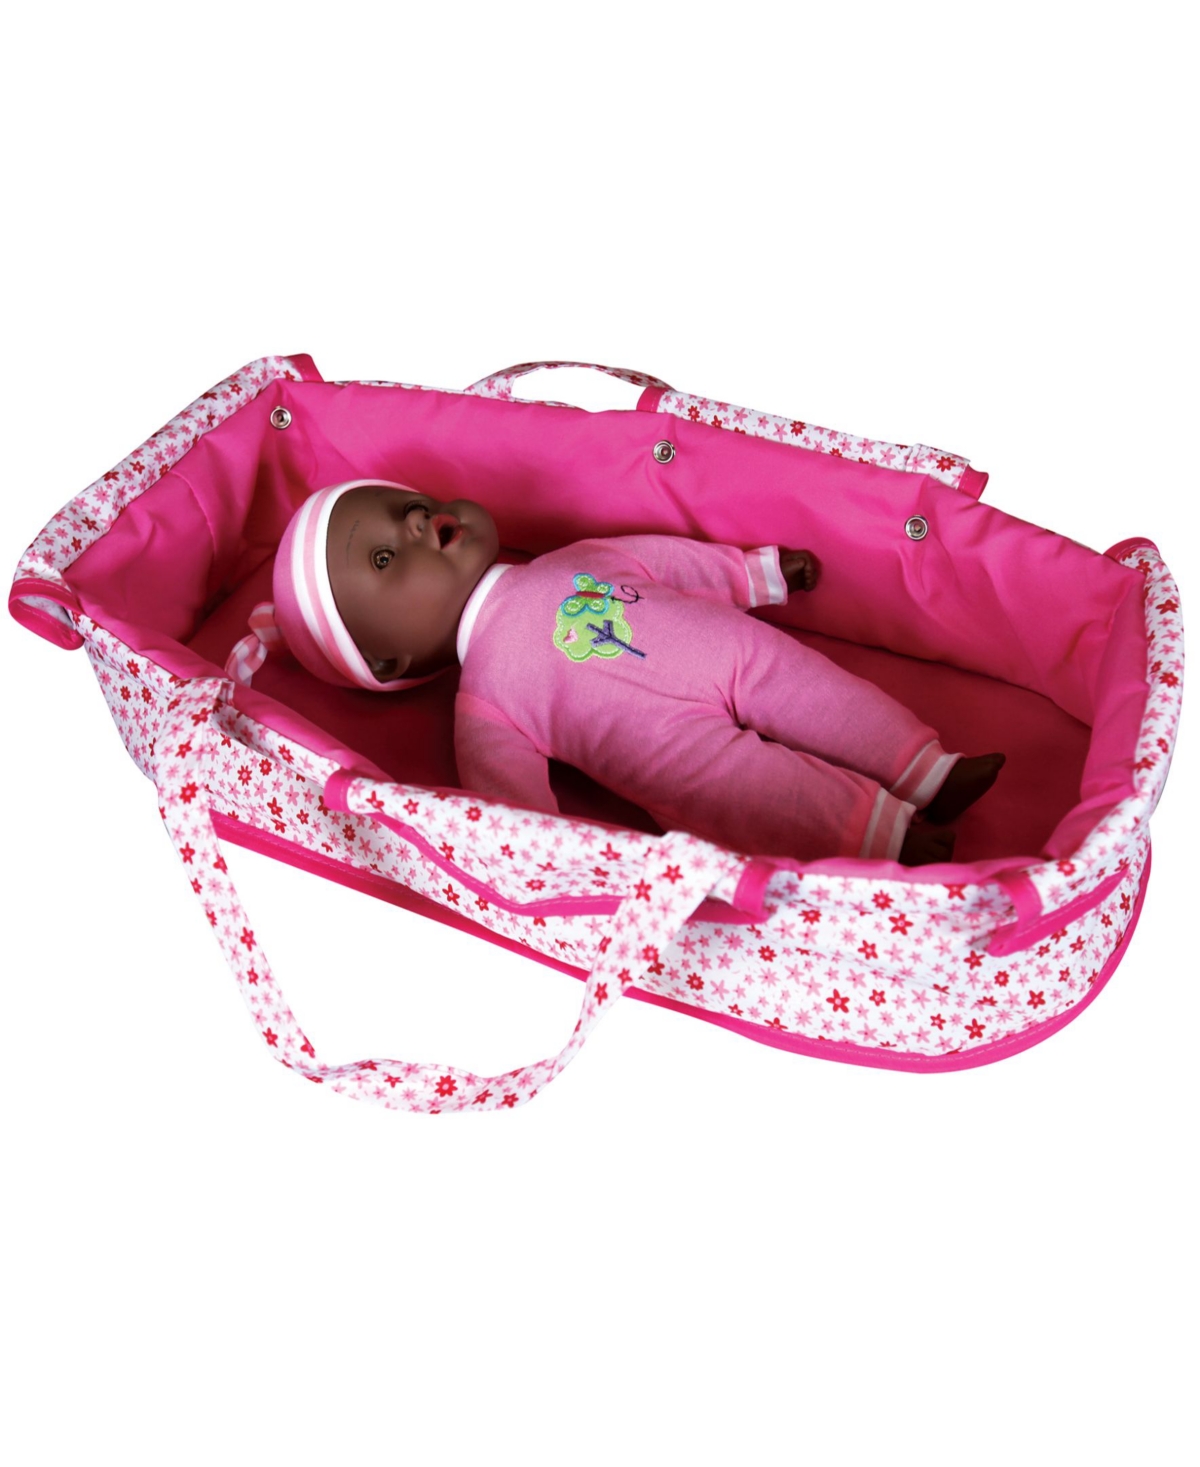 Lissi Dolls Deluxe Doll Pram With African American Baby Doll In Multi